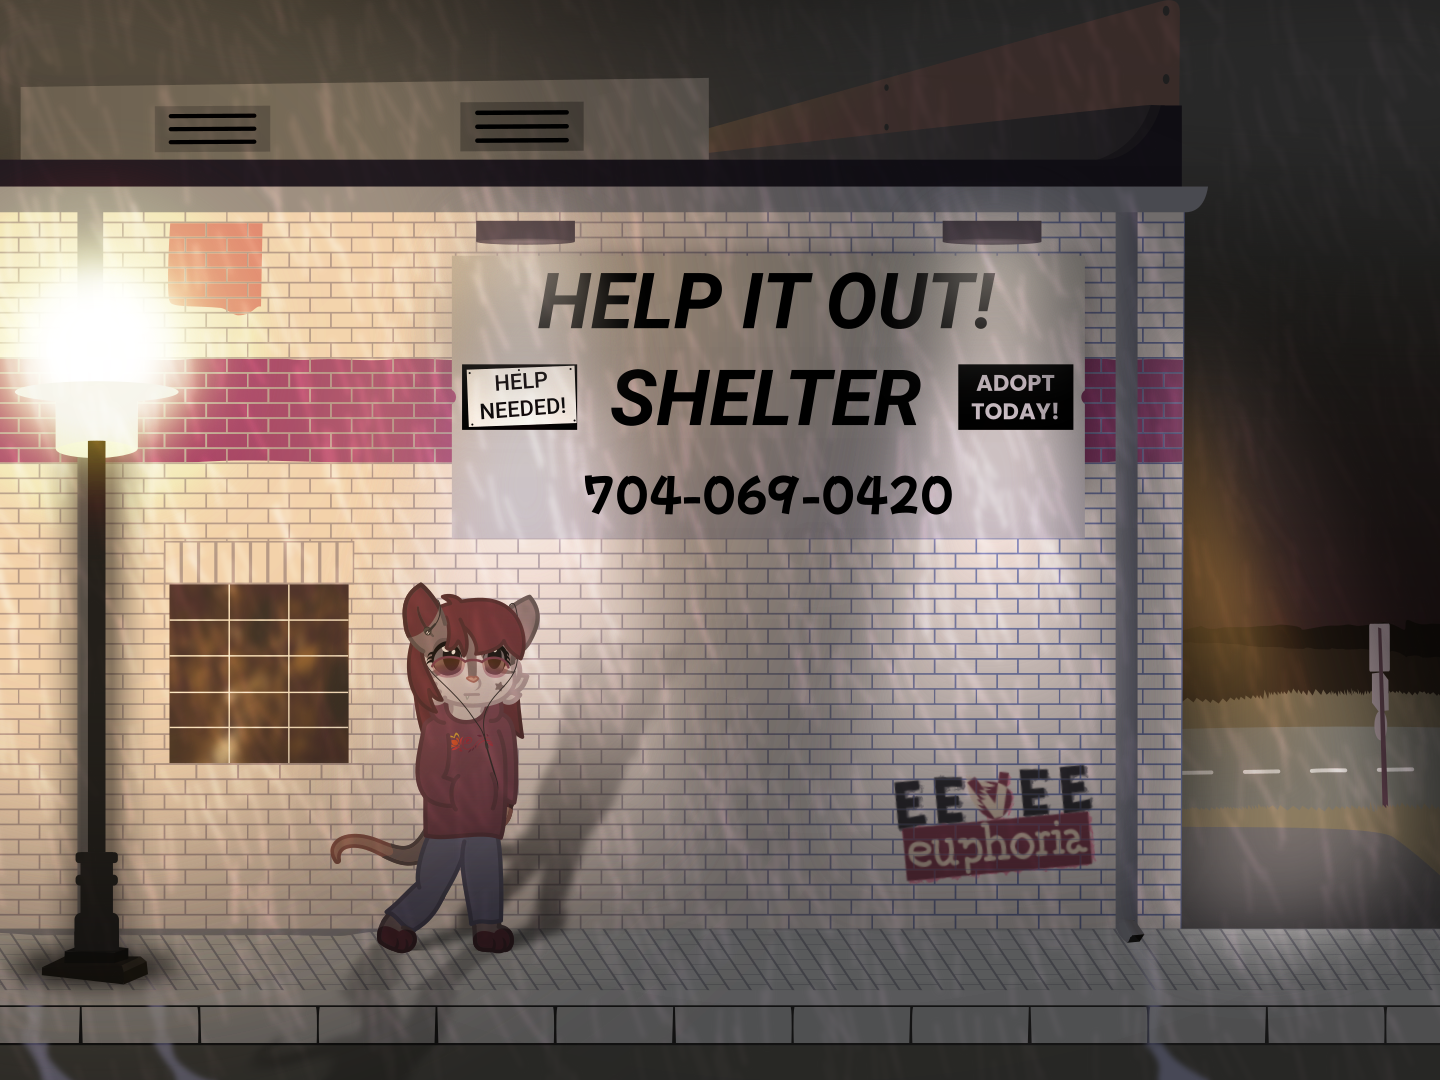 A possum is standing outside in the rain, looking up a sign that says HELP IT OUT! SHELTER, ADOPT TODAY!